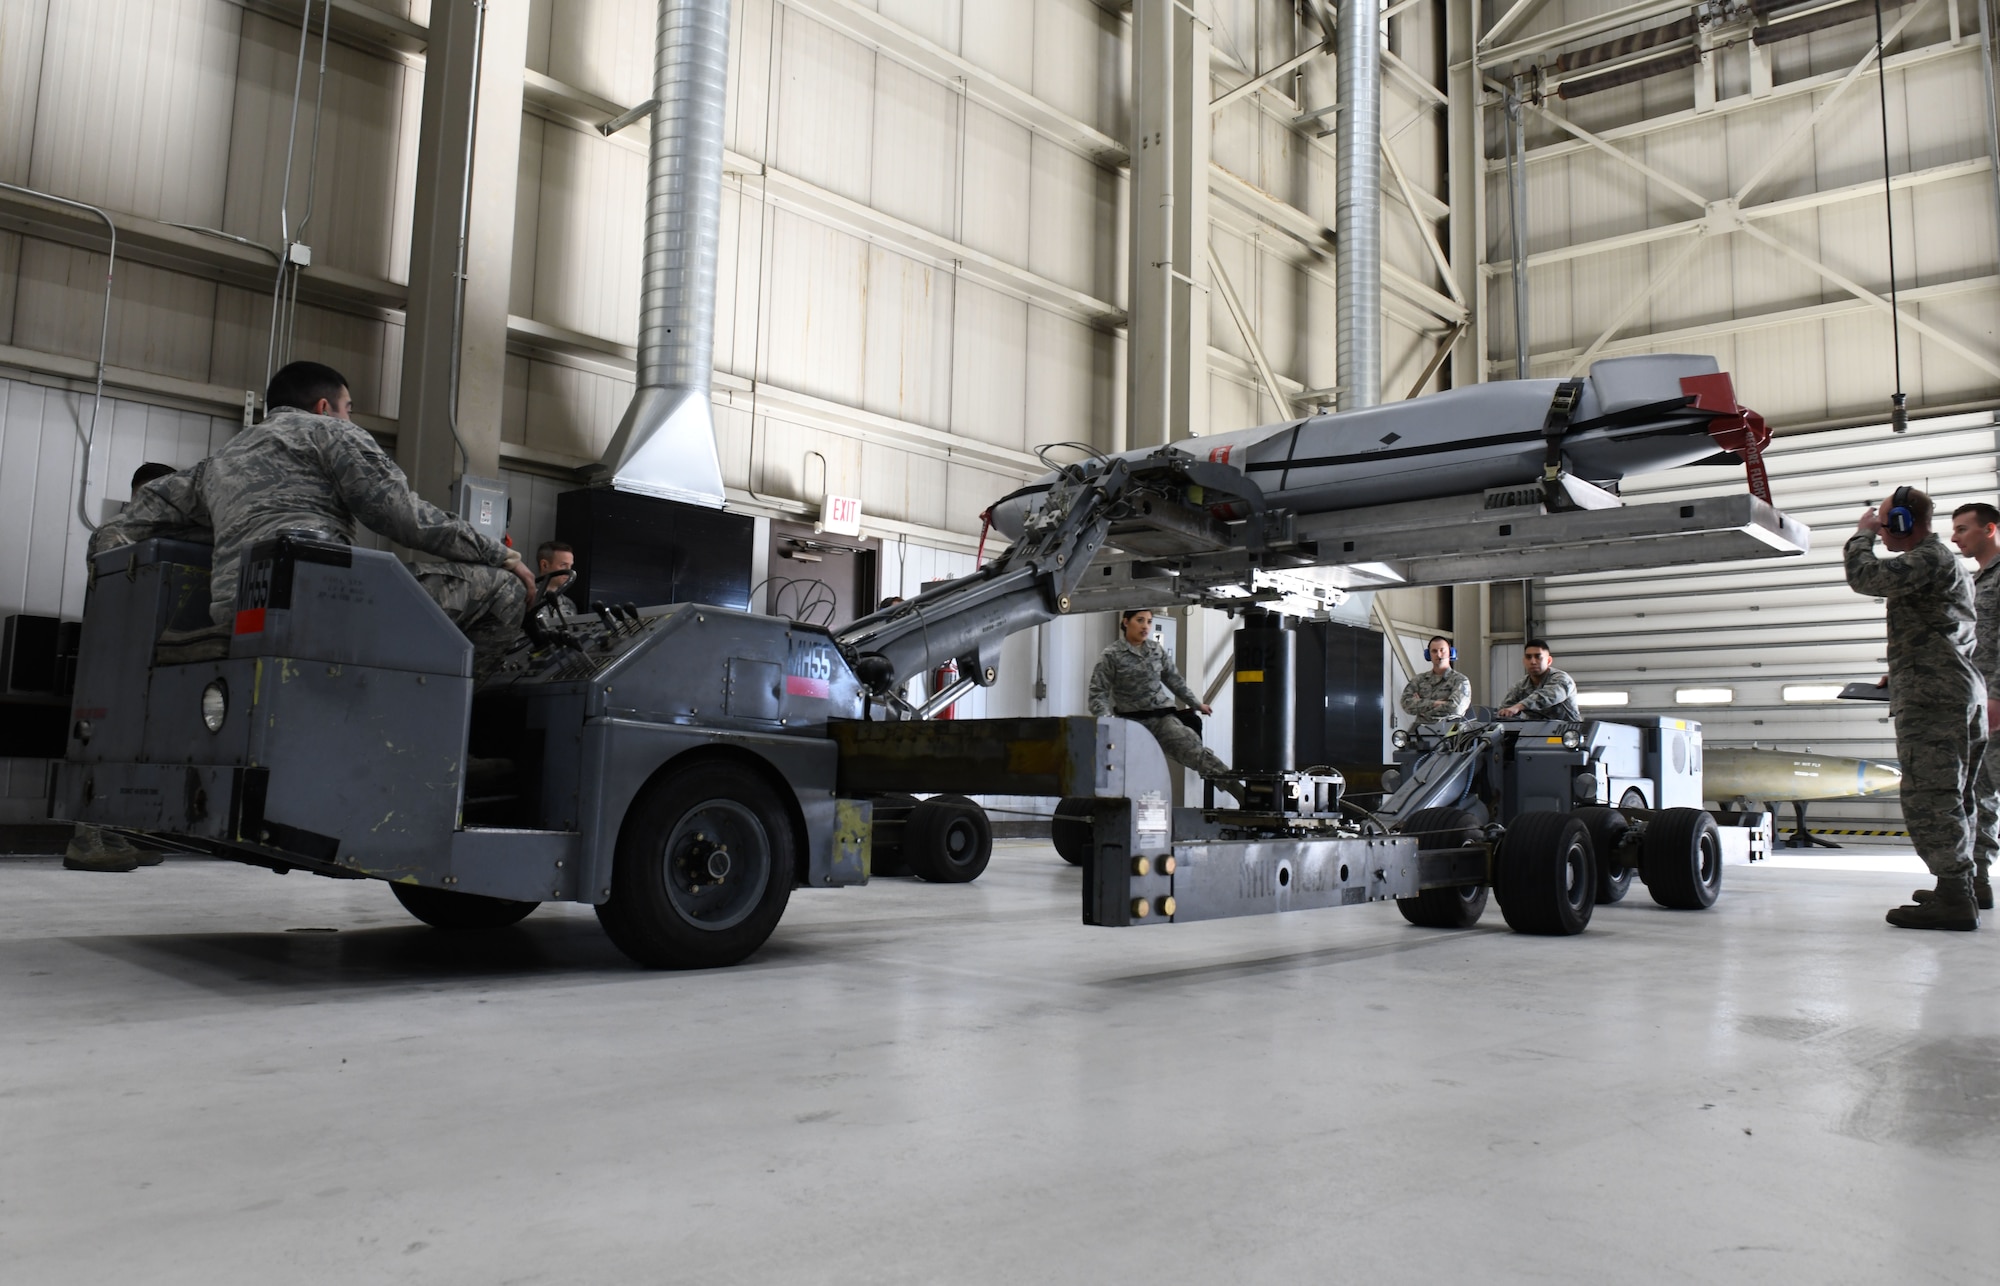 Load crew members from the 28th Munitions Squadron use a munitions lift truck or ‘jammer’, to load an inert AGM-158 Joint Air-to-Surface Standoff Missile into a simulated B-1 bomber at the annual weapons load competition at Ellsworth Air Force Base, S.D., Jan. 7, 2019. Each team was required to complete the loading process within 40 minutes and were also graded on proficiency, technique and safety. (U.S. Air Force photo by Airman 1st Class Christina Bennett)